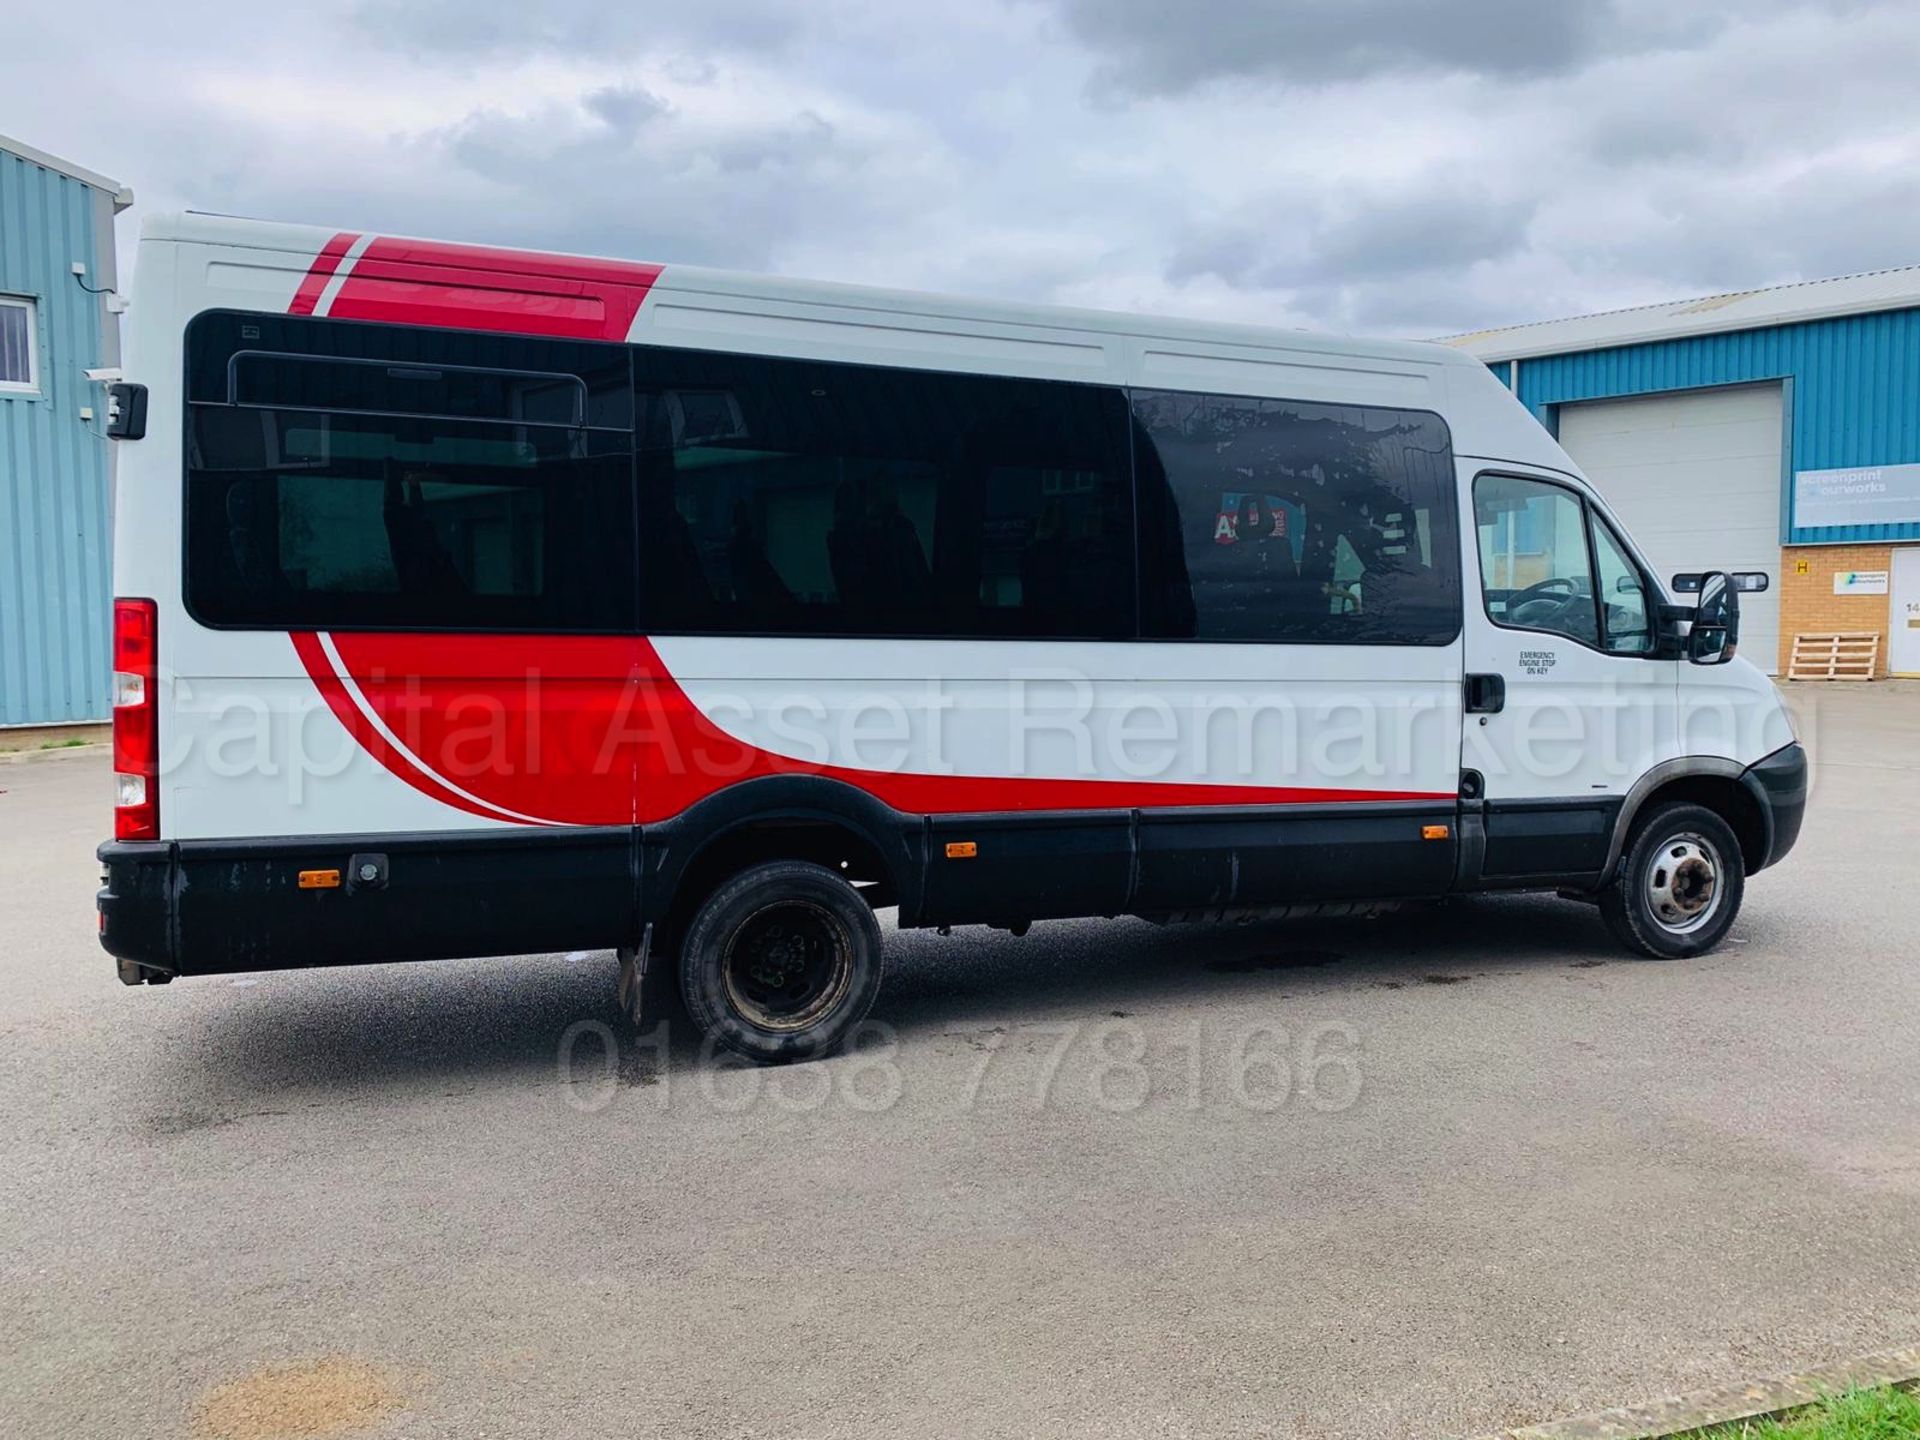 (ON SALE) IVECO DAILY *LWB - 16 SEATER MINI-BUS / COACH* (2010) '3.0 DIESEL - 146 BHP' *ELEC RAMP* - Image 10 of 32